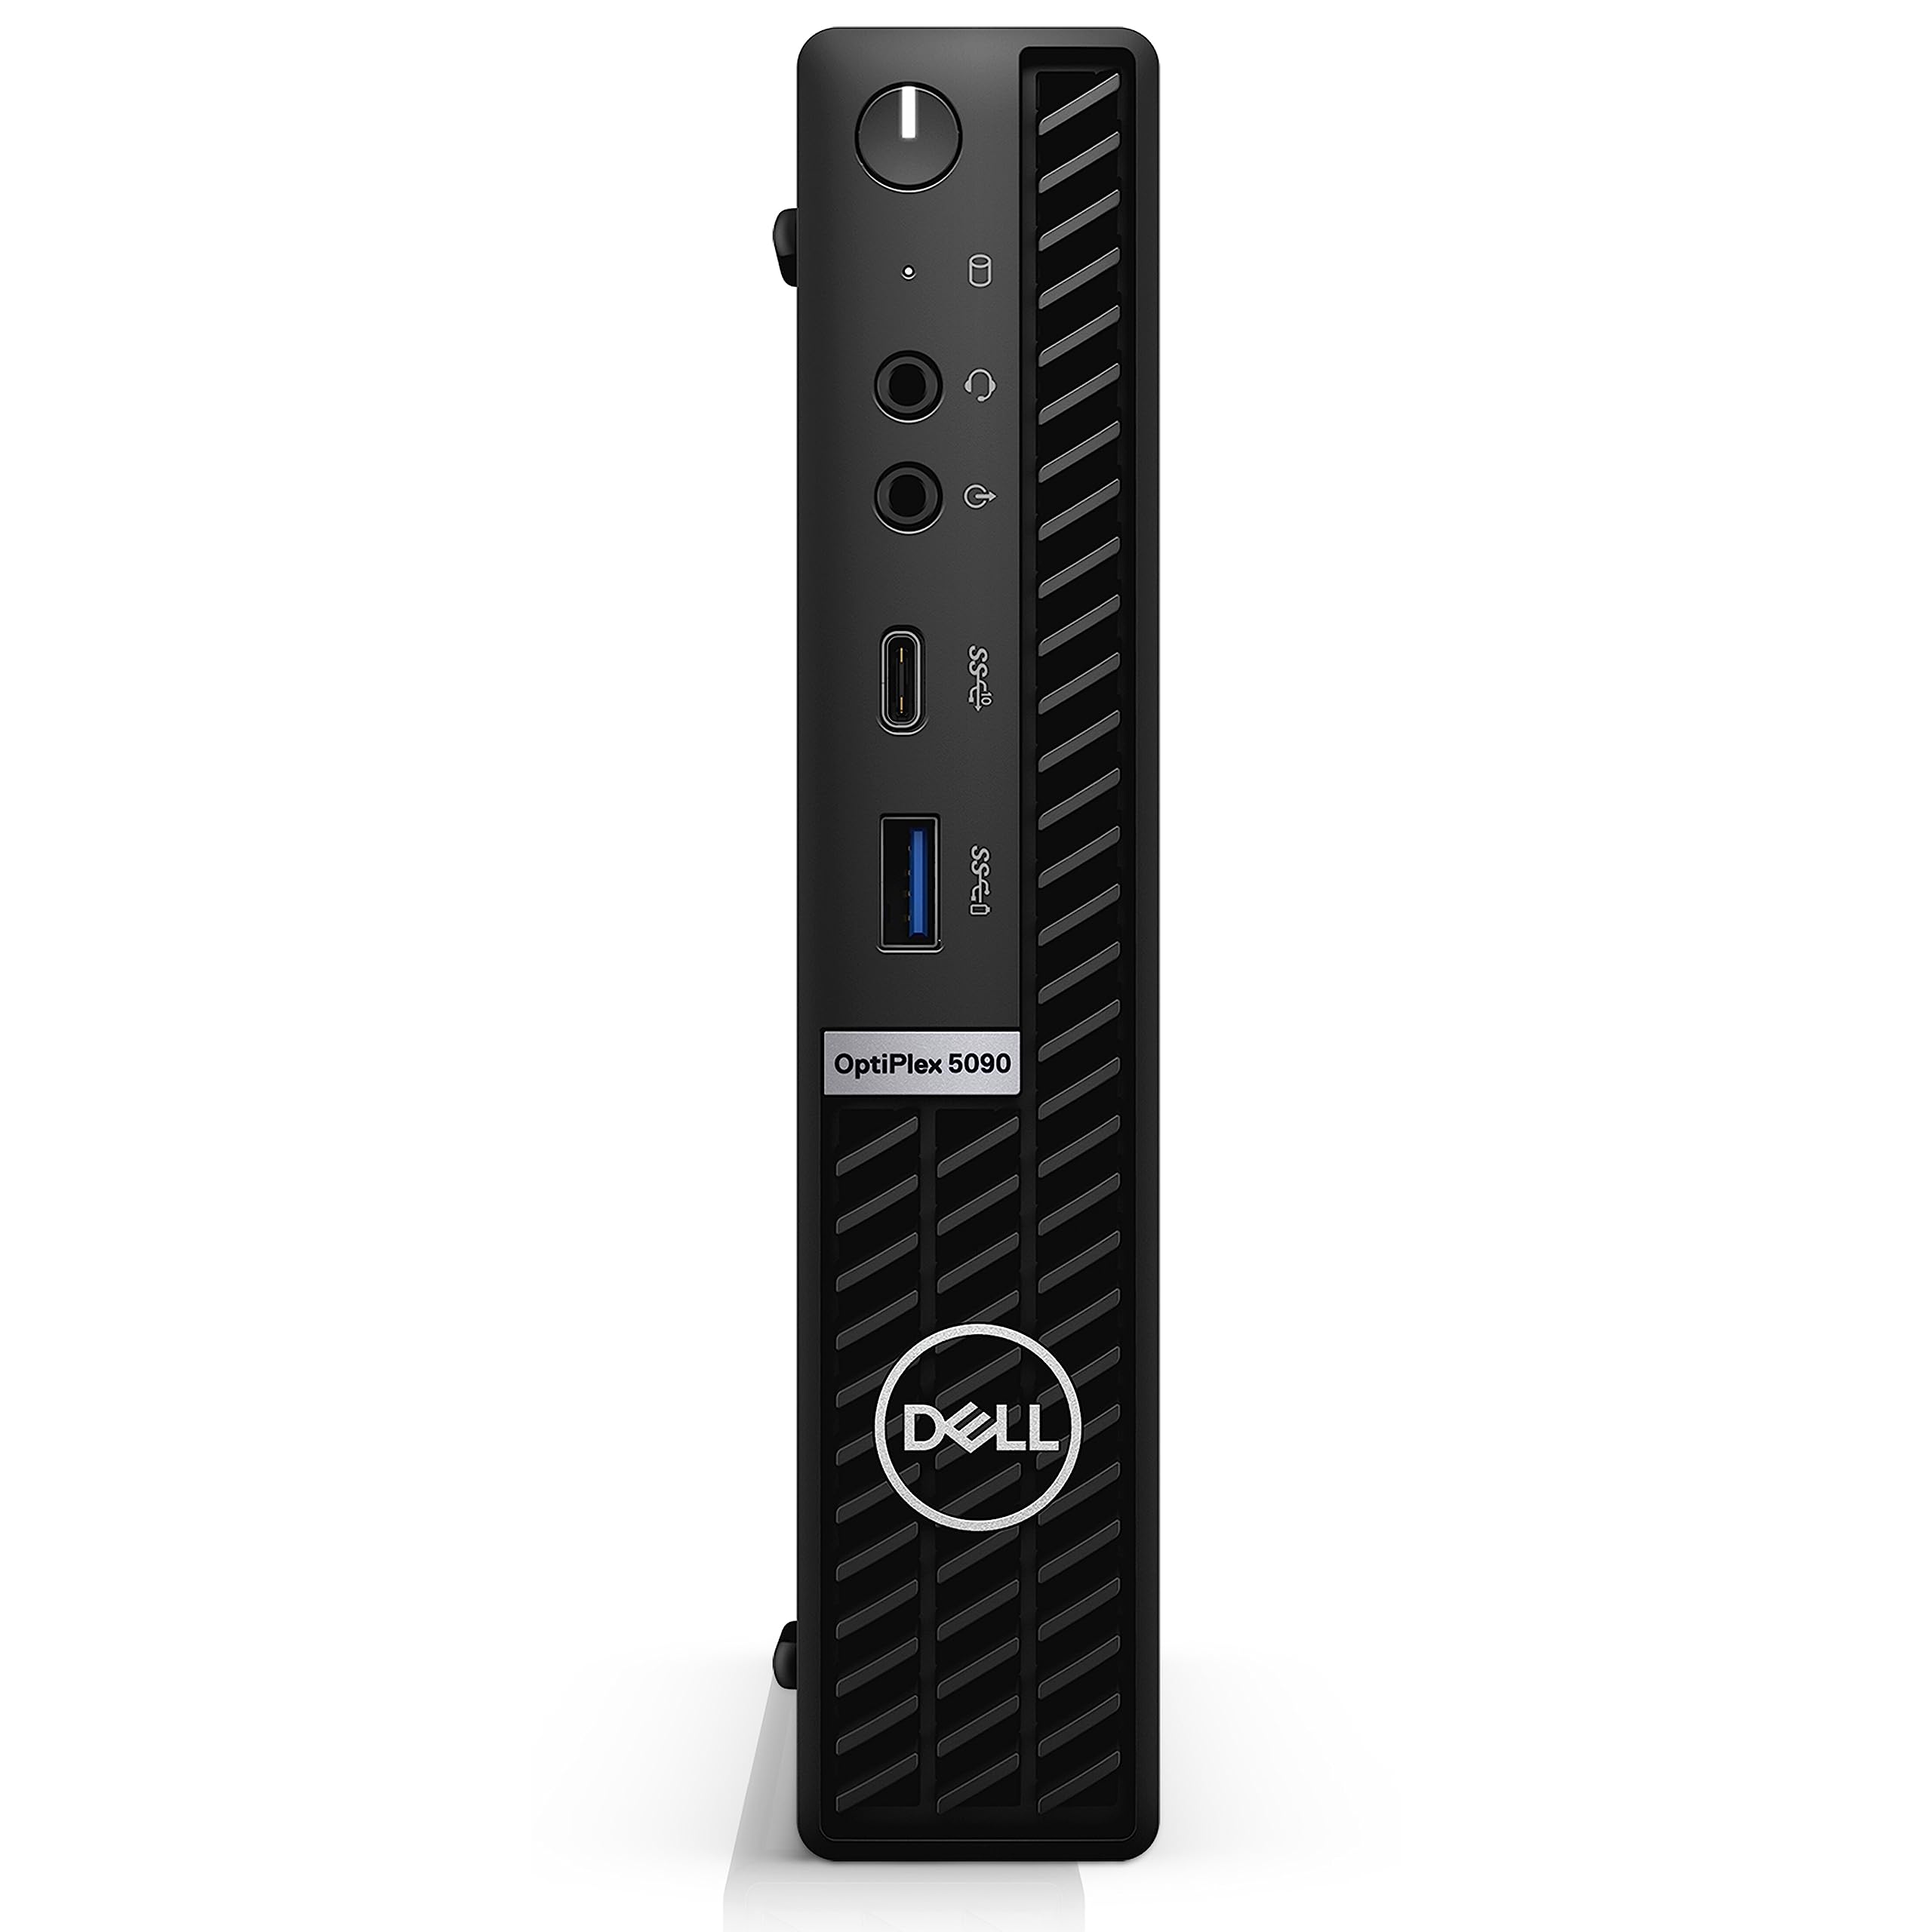 Dell OptiPlex 5090 Micro MFF Business Desktop Computer, Intel Hexa-Core i5-10500T up to 3.8GHz, 32GB DDR4 RAM, 1TB PCIe SSD, WiFi 6, Wireless Antenna, Bluetooth, Keyboard and Mouse, Windows 10 Pro